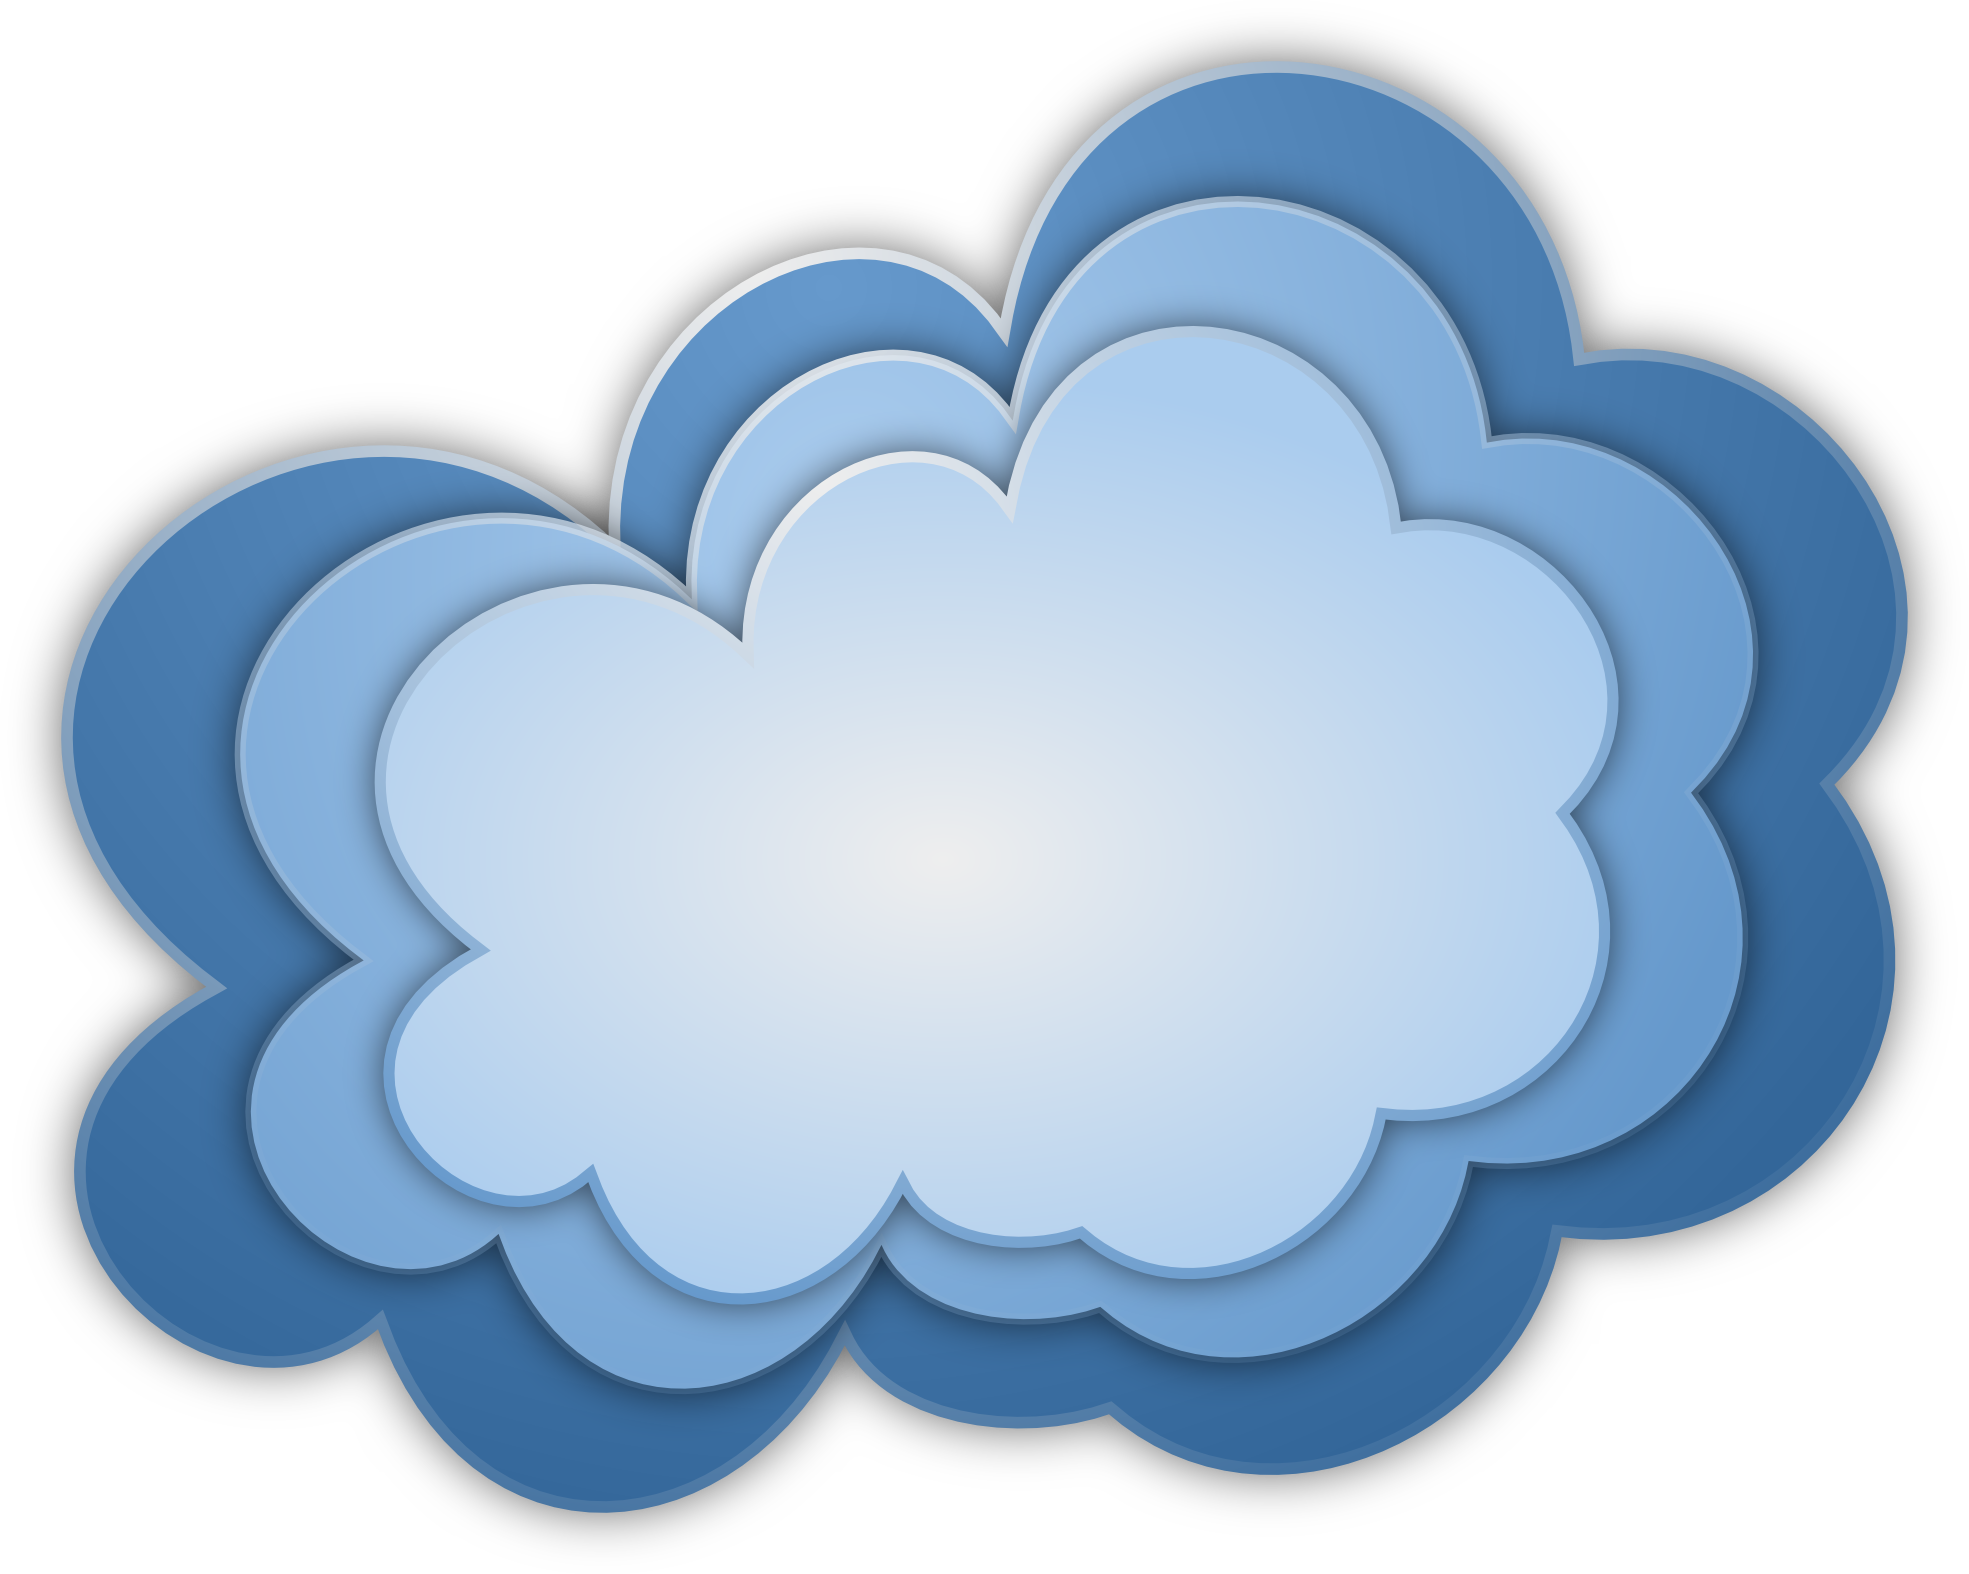 Cloud Merlin Scalable Vector Graphics SVG clipartsy.